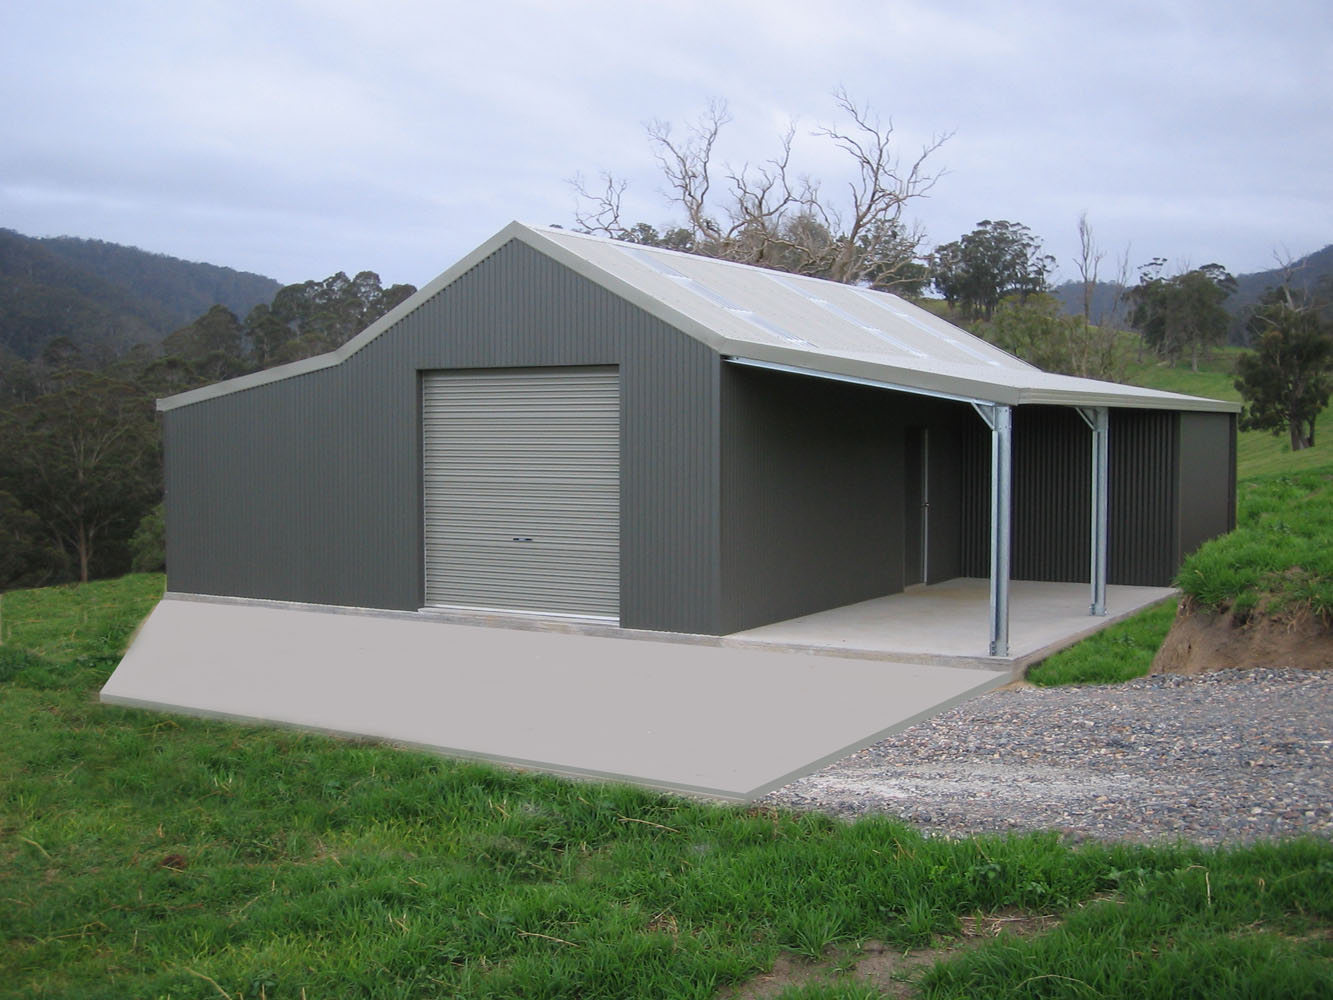 Traditional Aussie barns have a two stage roof that continues over the 